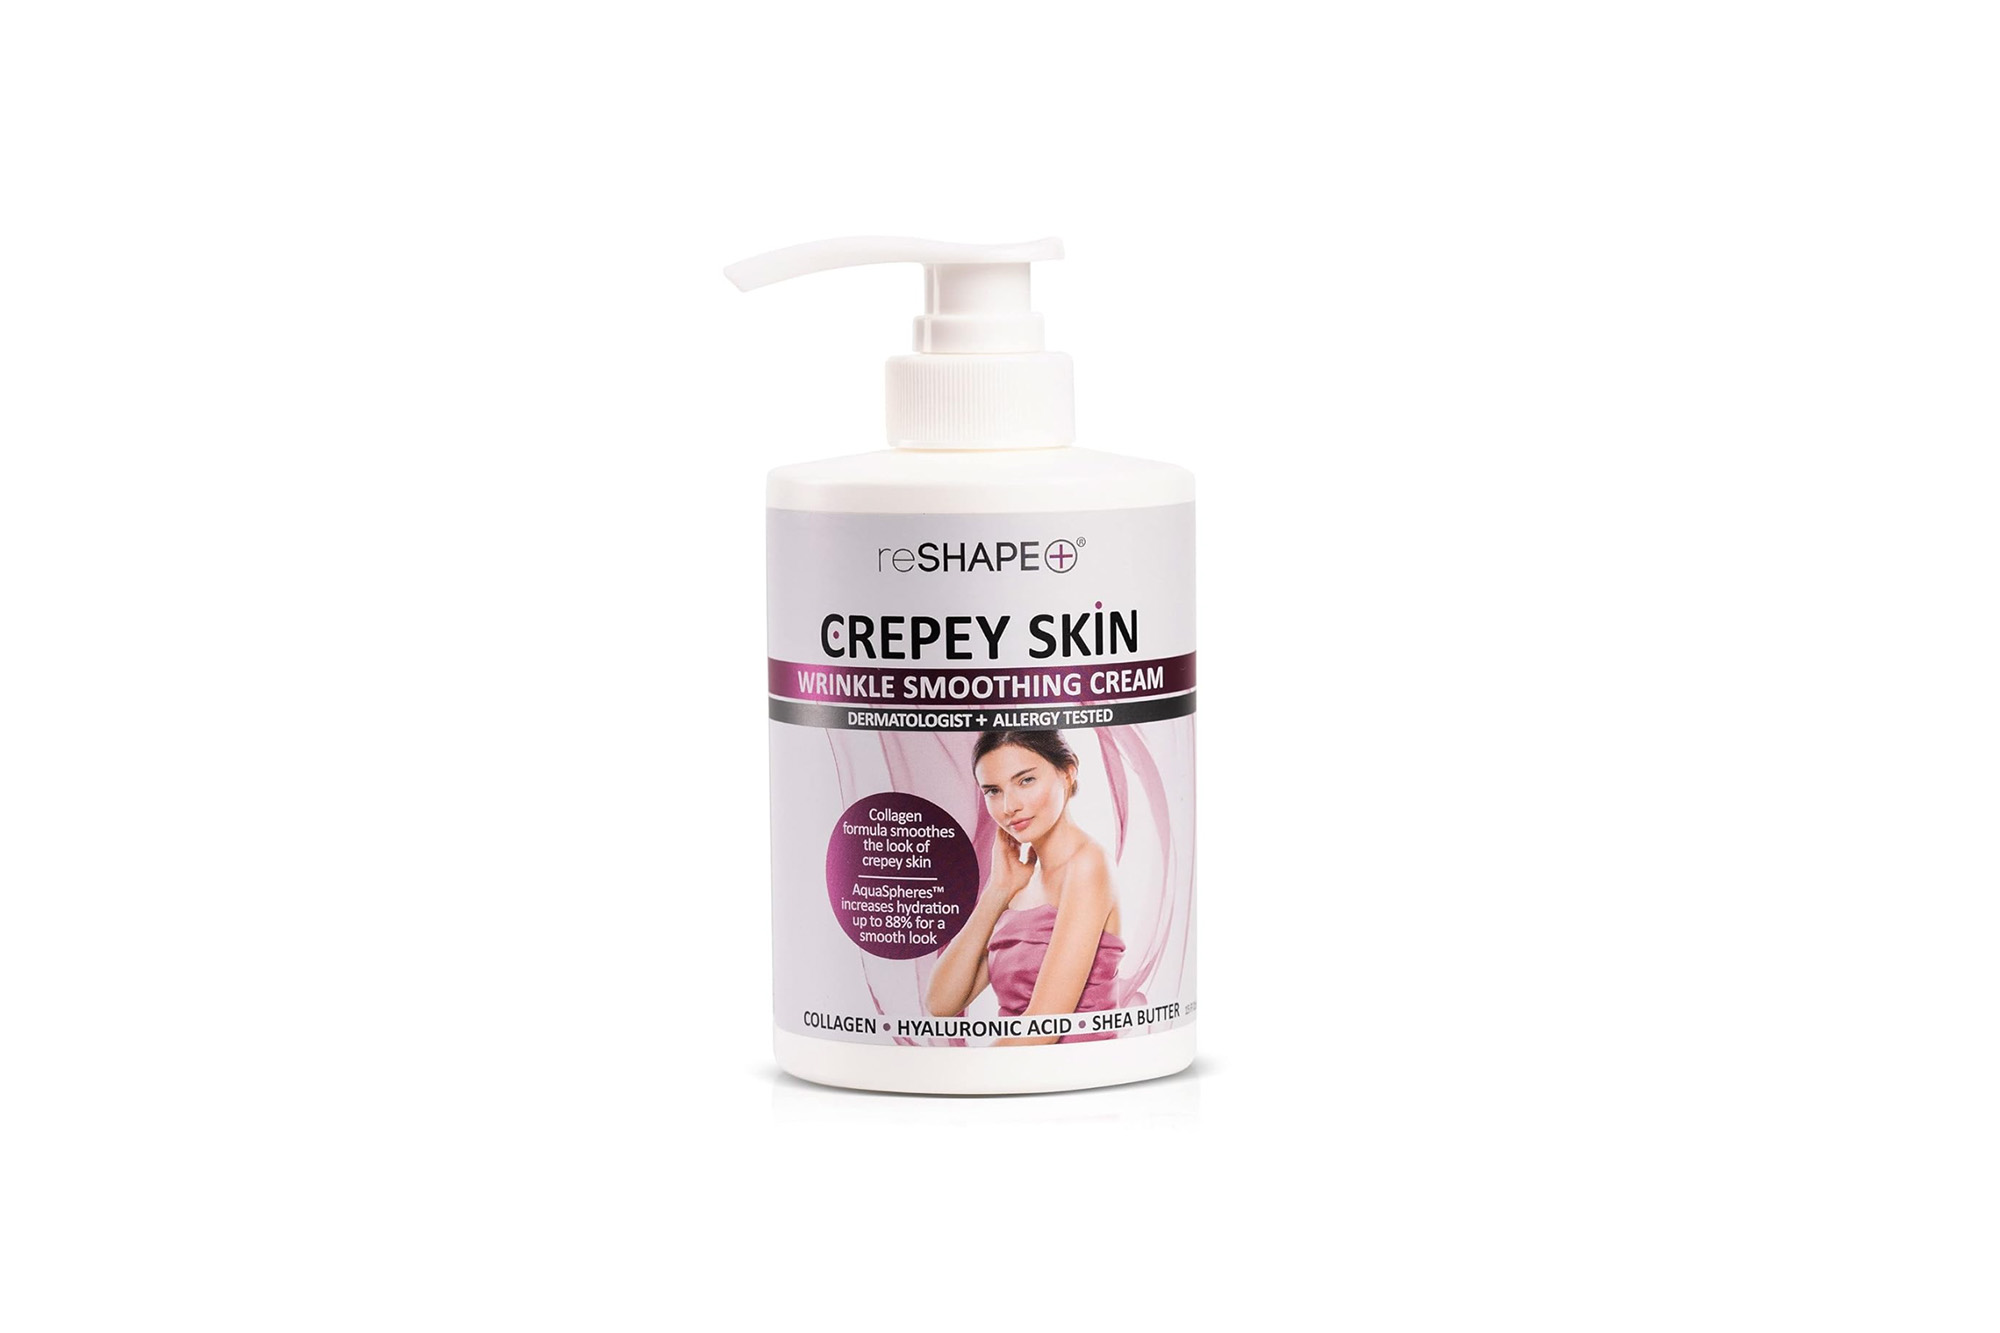 RESHAPE+ Crepey Skin Body Cream for Reducing Wrinkles and Signs of